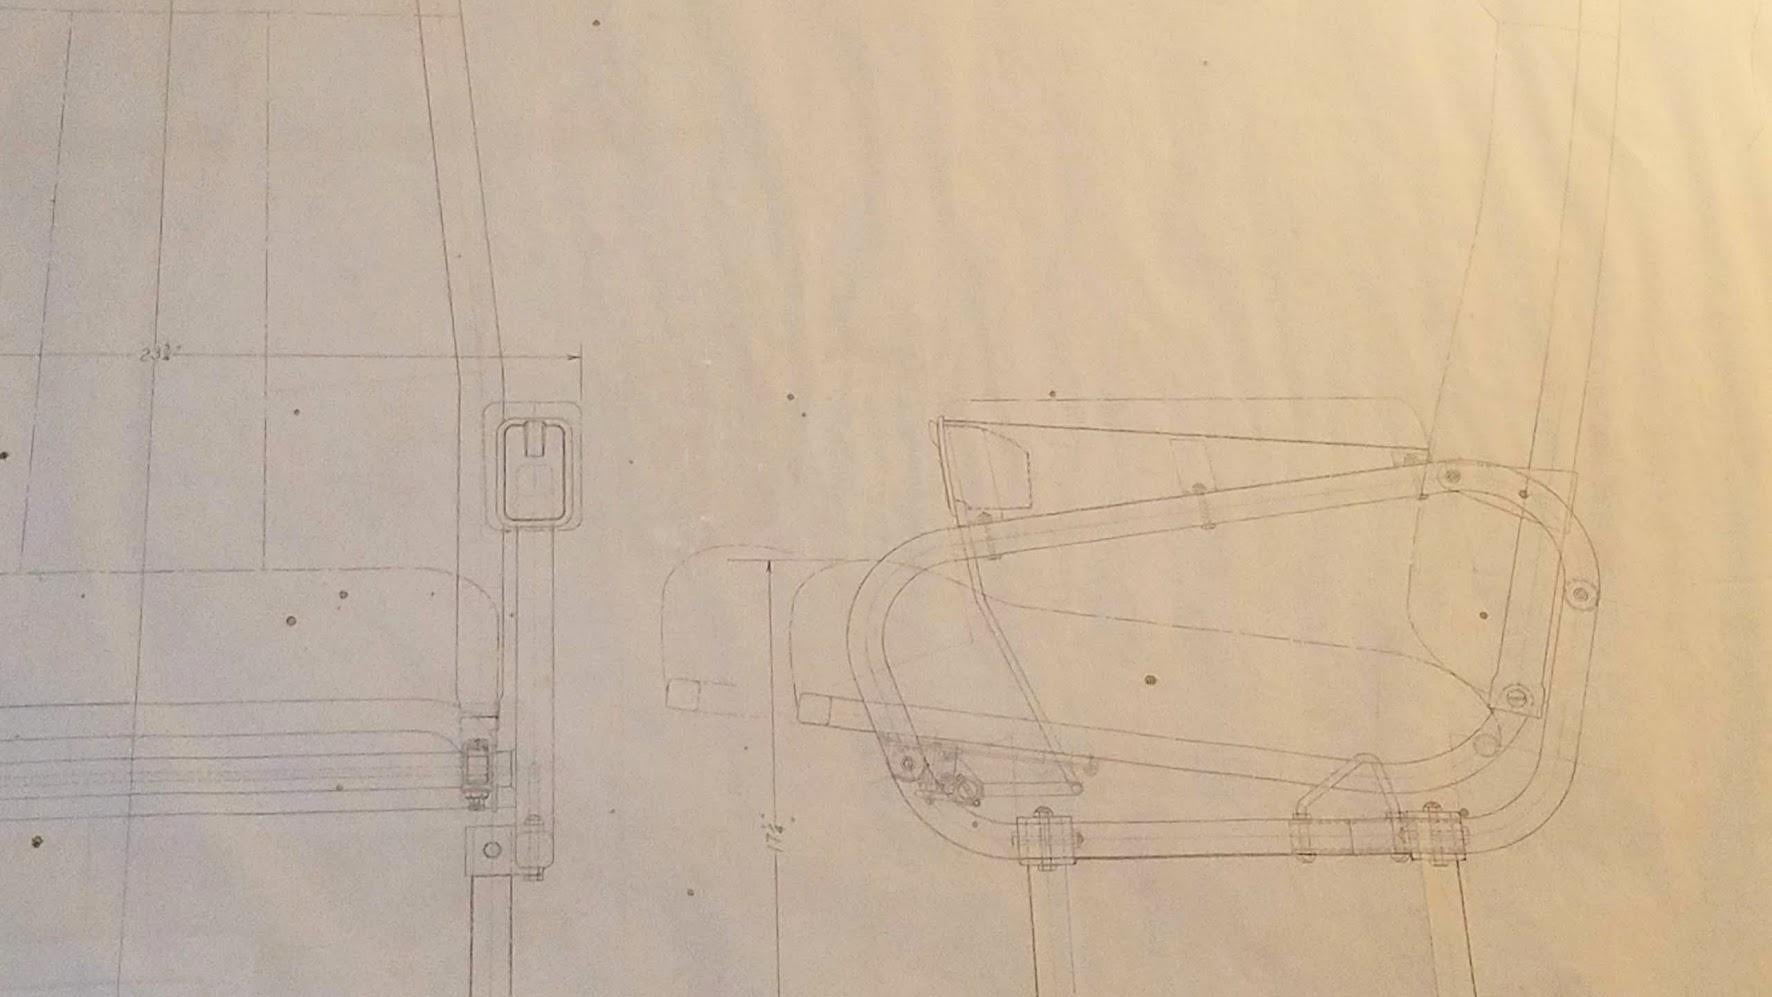 Warren McArthur rare original  pencil proposal sketch (SK 1749) for an aircraft passenger seat for the Lockheed Corporation. 
This proposal was accepted and the seat was manufactured by Warren McArthur in the 1940s for use in Lockheed's classic